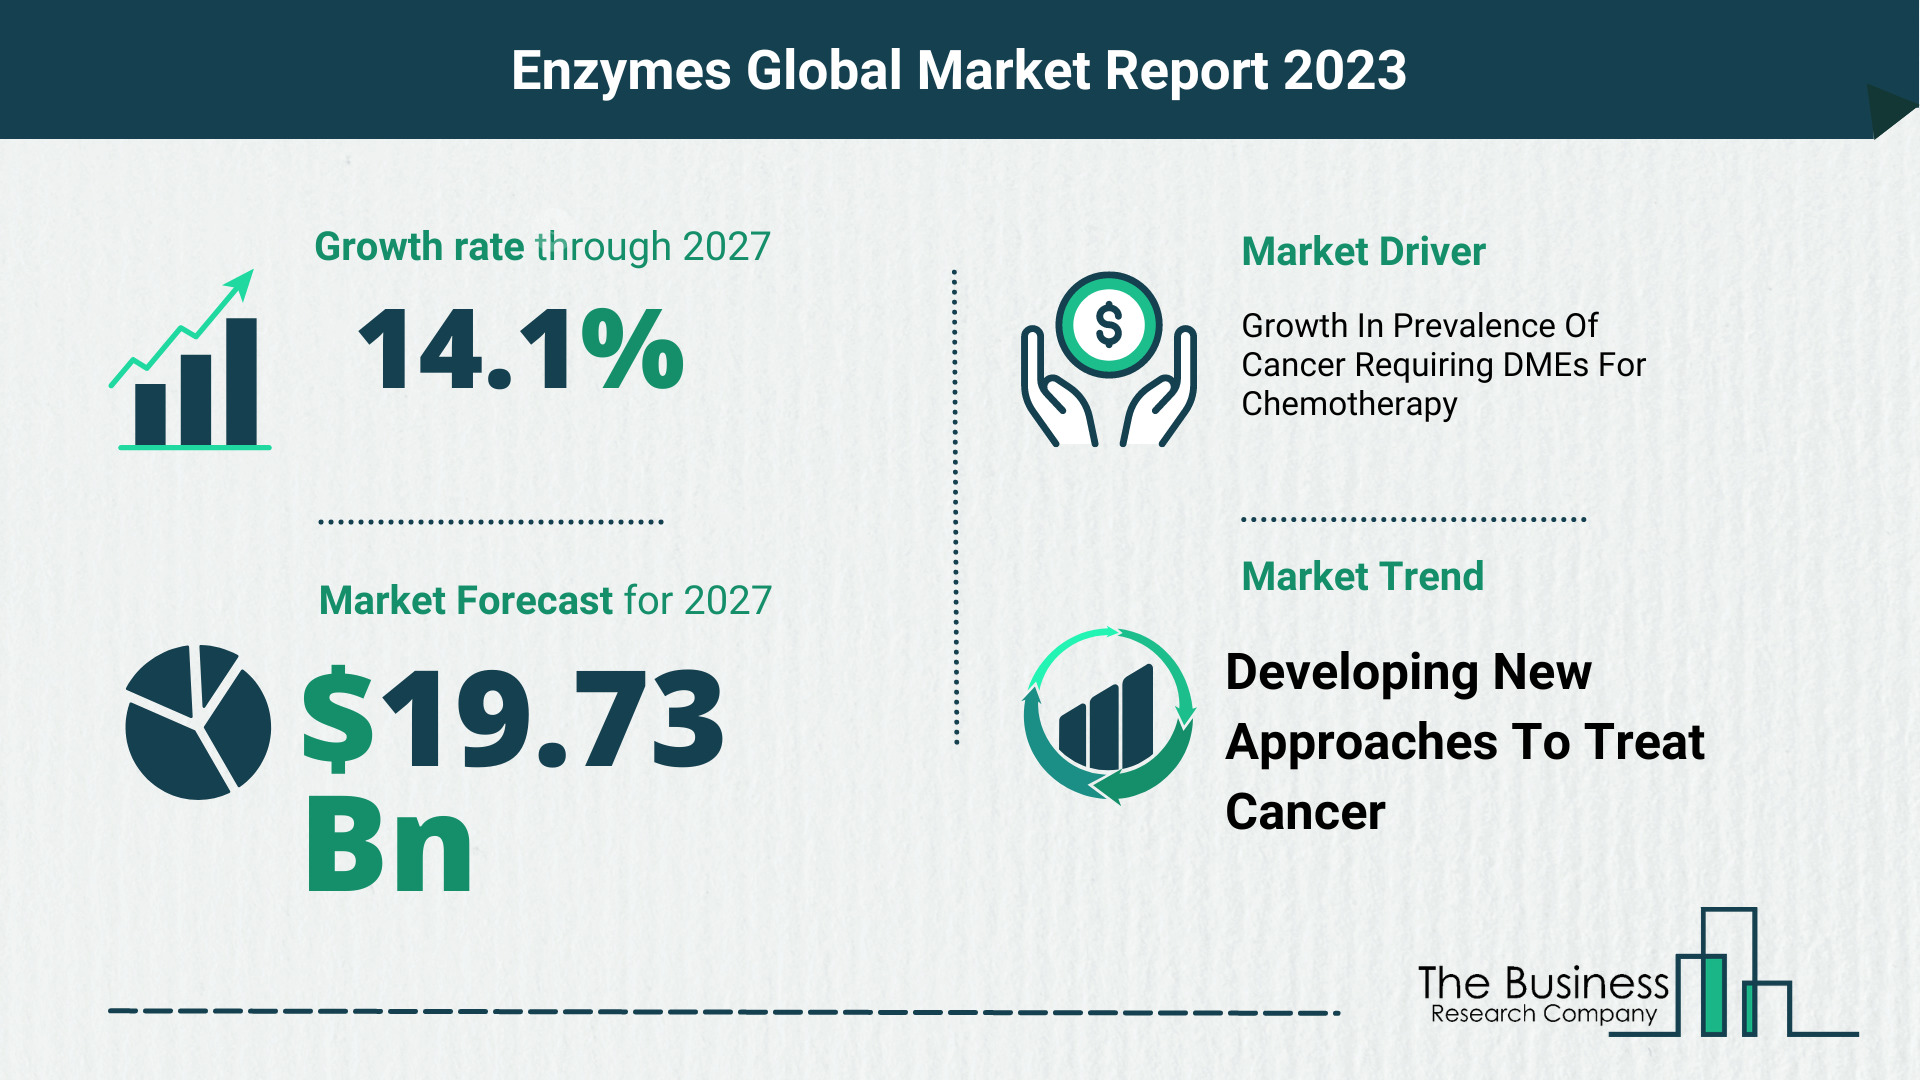 Global Enzymes Market Report